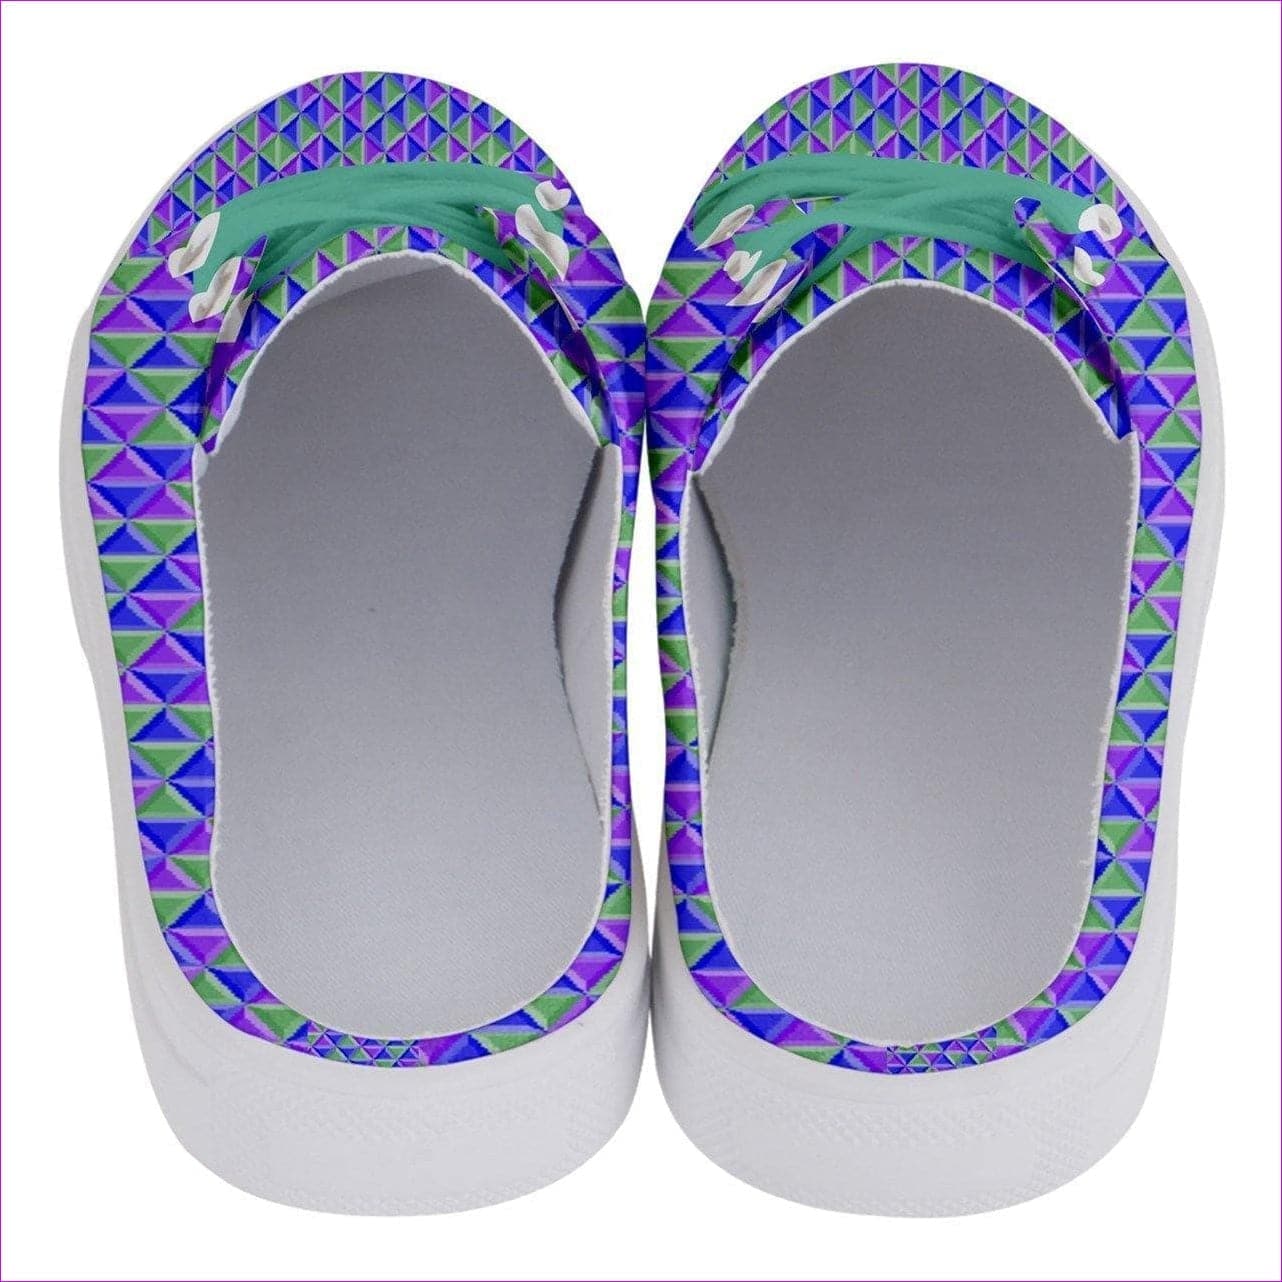 Royal Pyramid Women's Half Slippers - women's shoe at TFC&H Co.